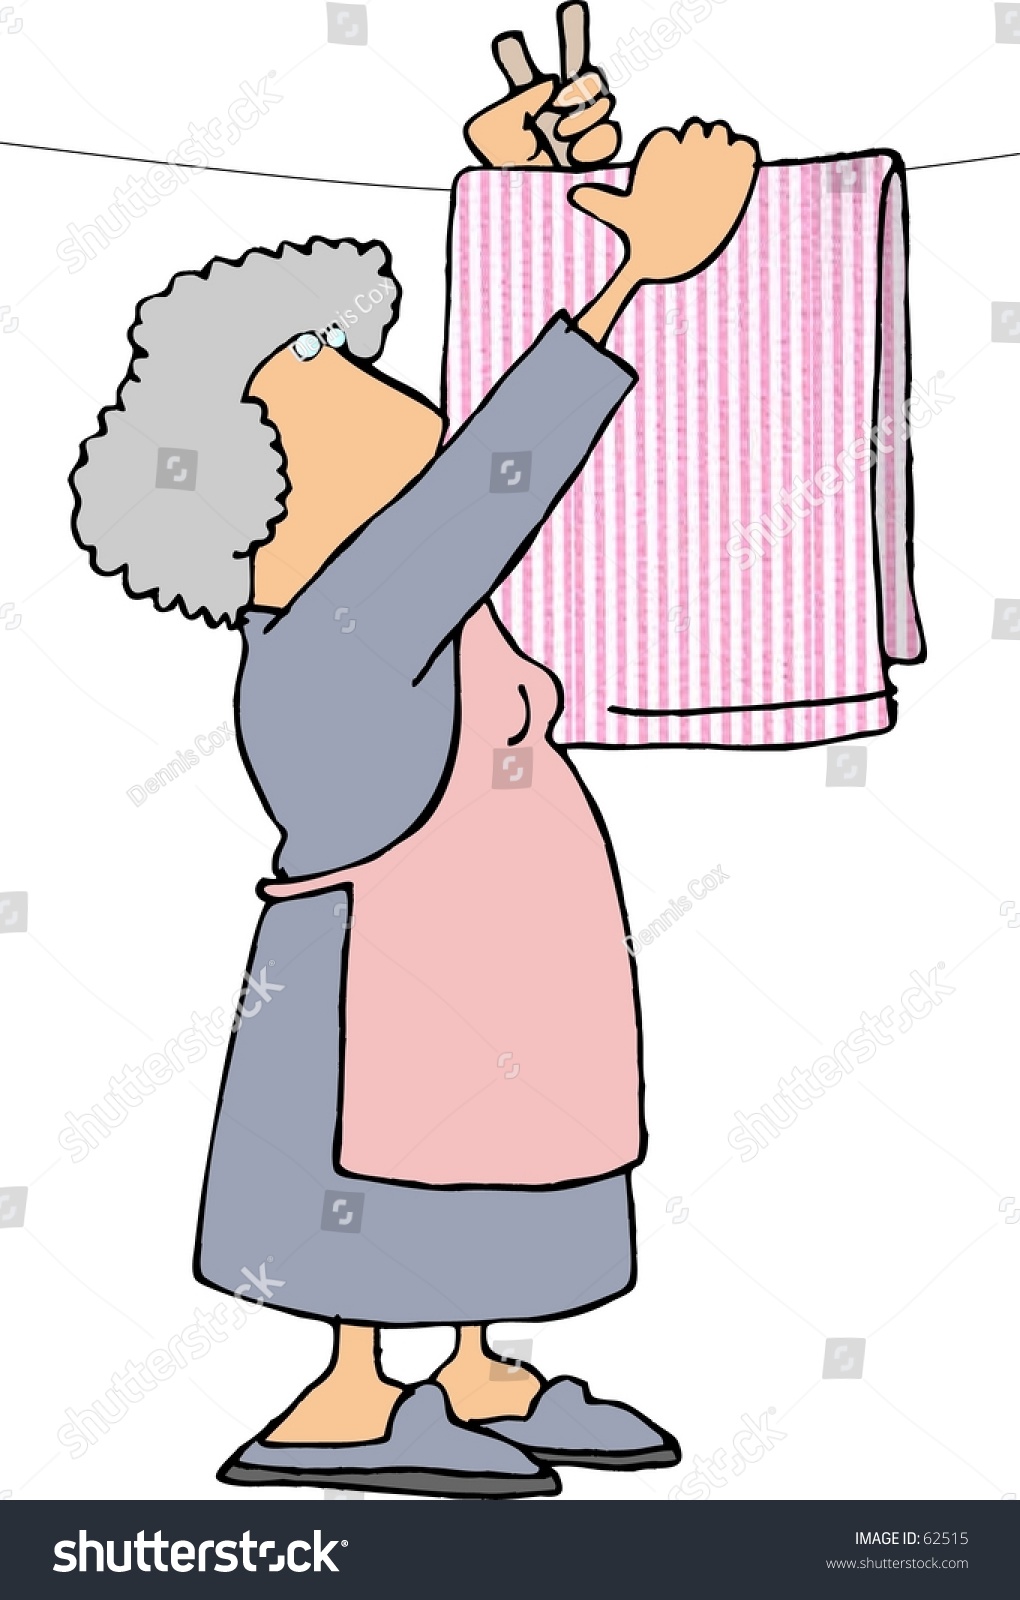 clipart of clothes hanging on a line - photo #50